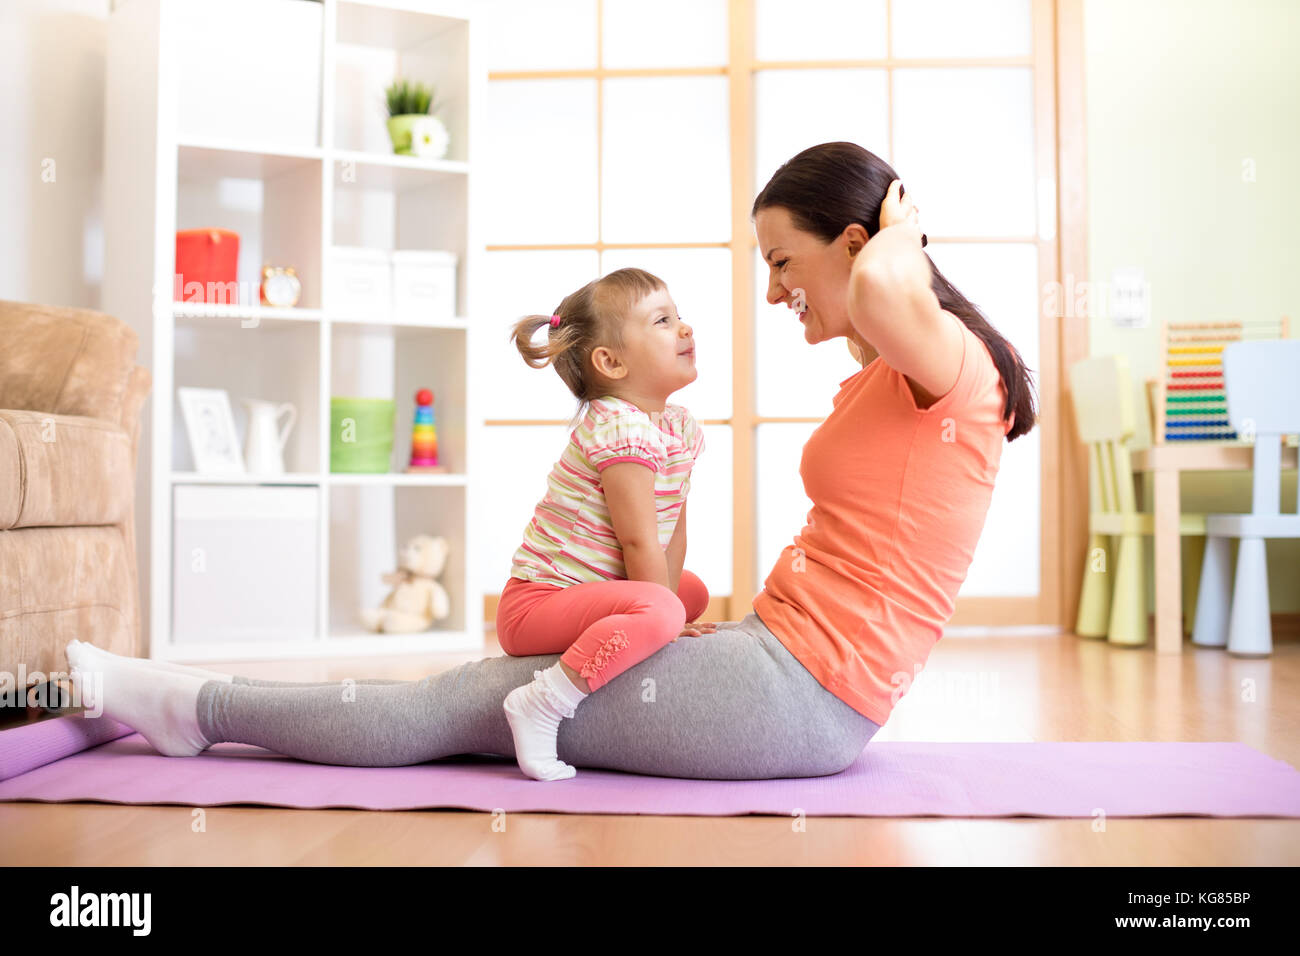 Mother and child daughter are engaged in fitness, yoga, exercise at home. Kid and woman swing press on stomach. Stock Photo